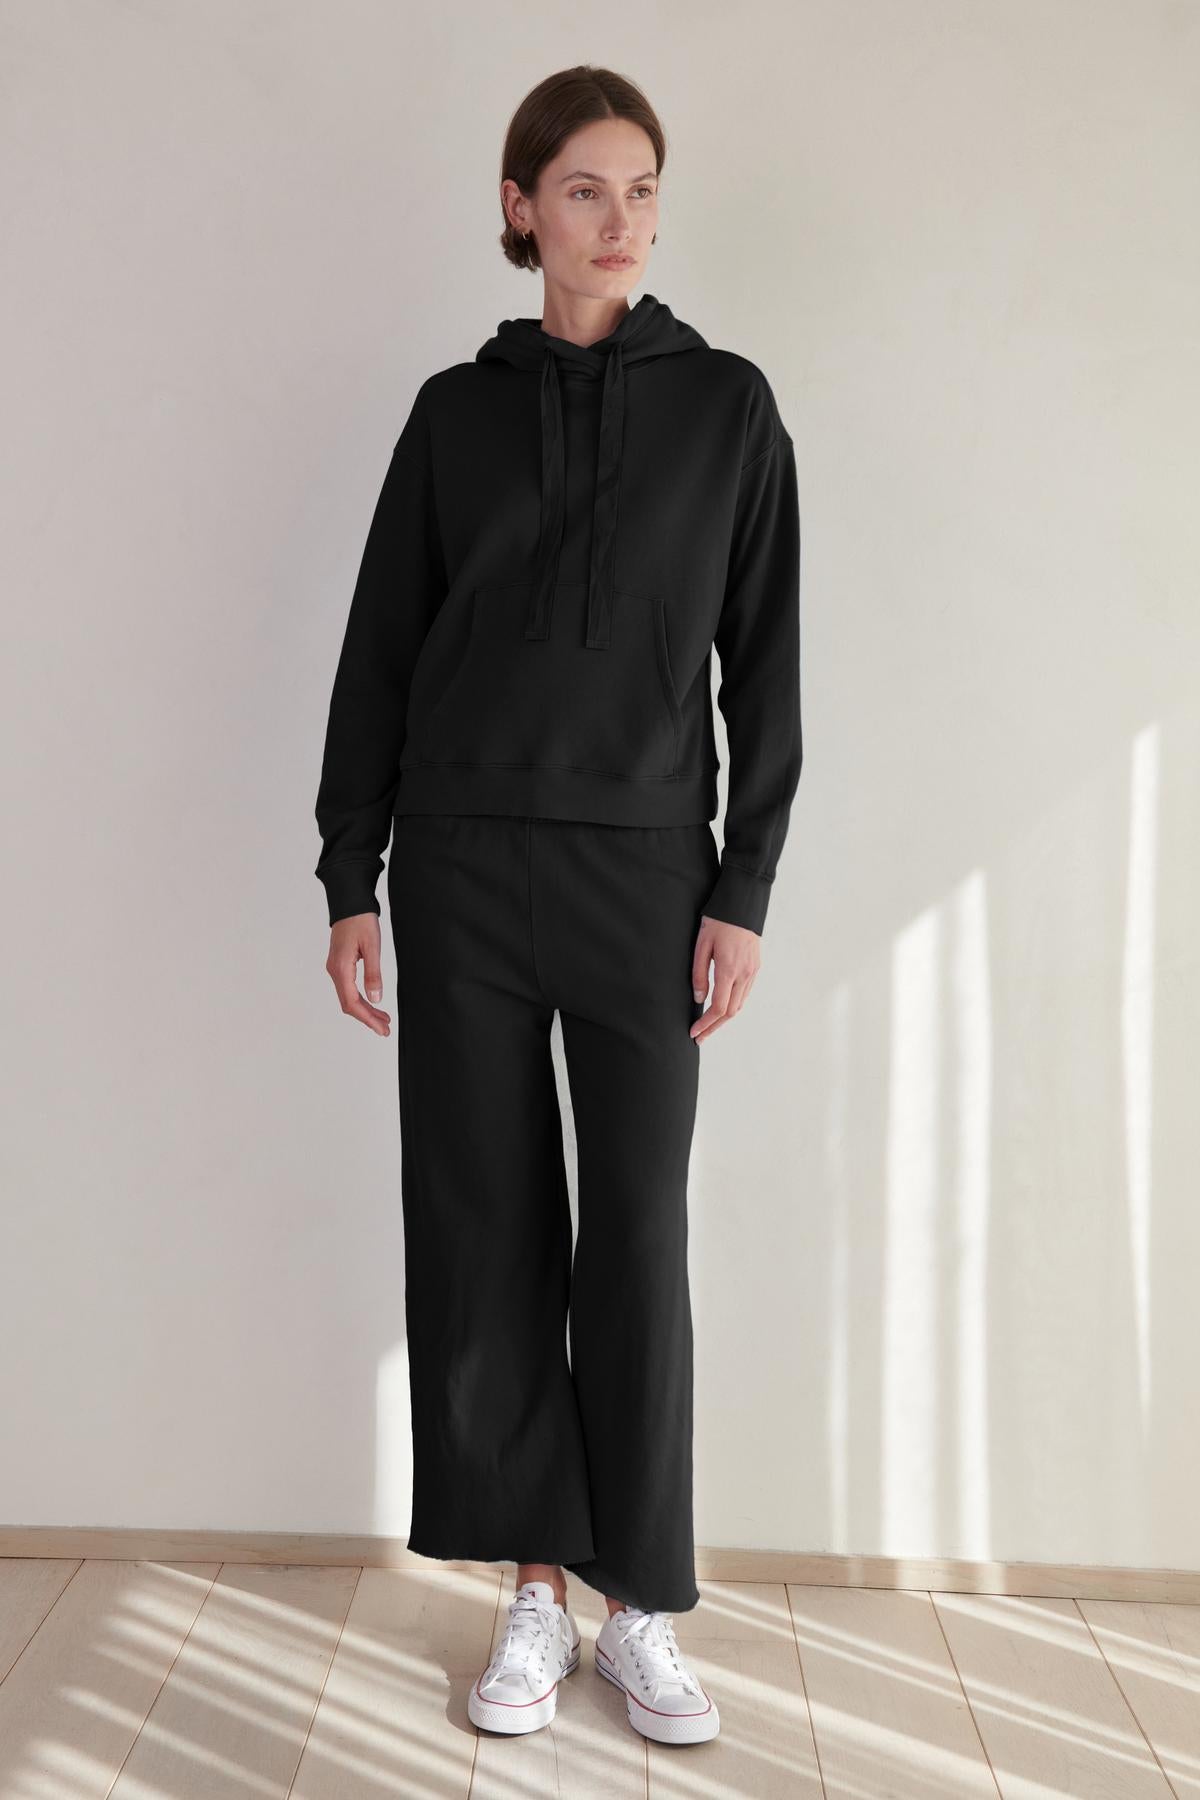 A woman wearing an OJAI HOODIE by Velvet by Jenny Graham and sweatpants.-26861801865409